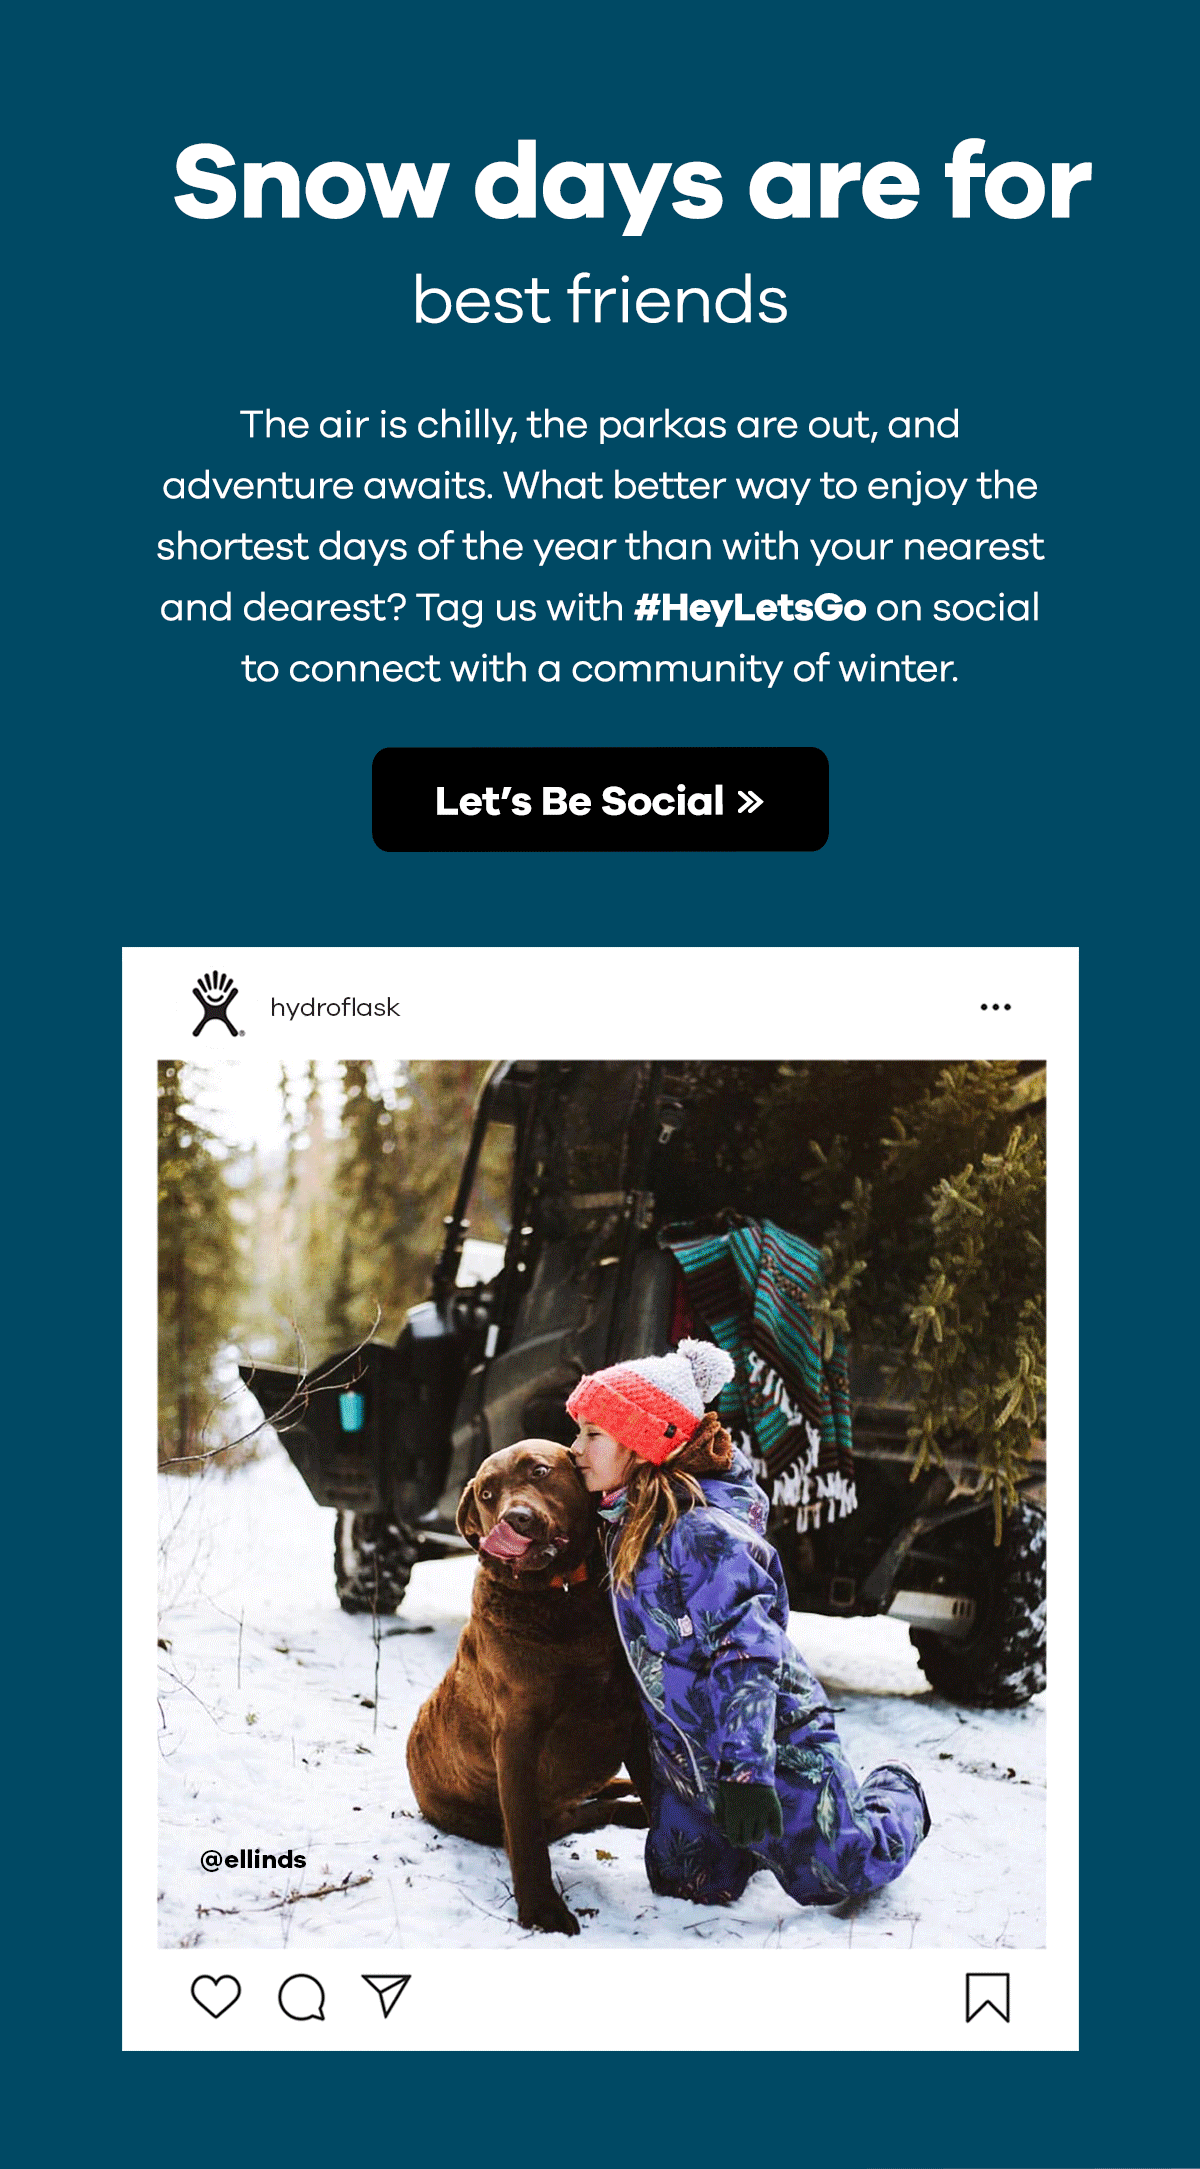 Snow days are for old friends, new friends, best friends, community | The air is chilly, the parkas are out, and adventure awaits. What better way to enjoy the shortest days of the year than with your nearest and dearest? Tag us with #HeyLetsGo on social and connect with a community of winter. | Let's Be Social >>